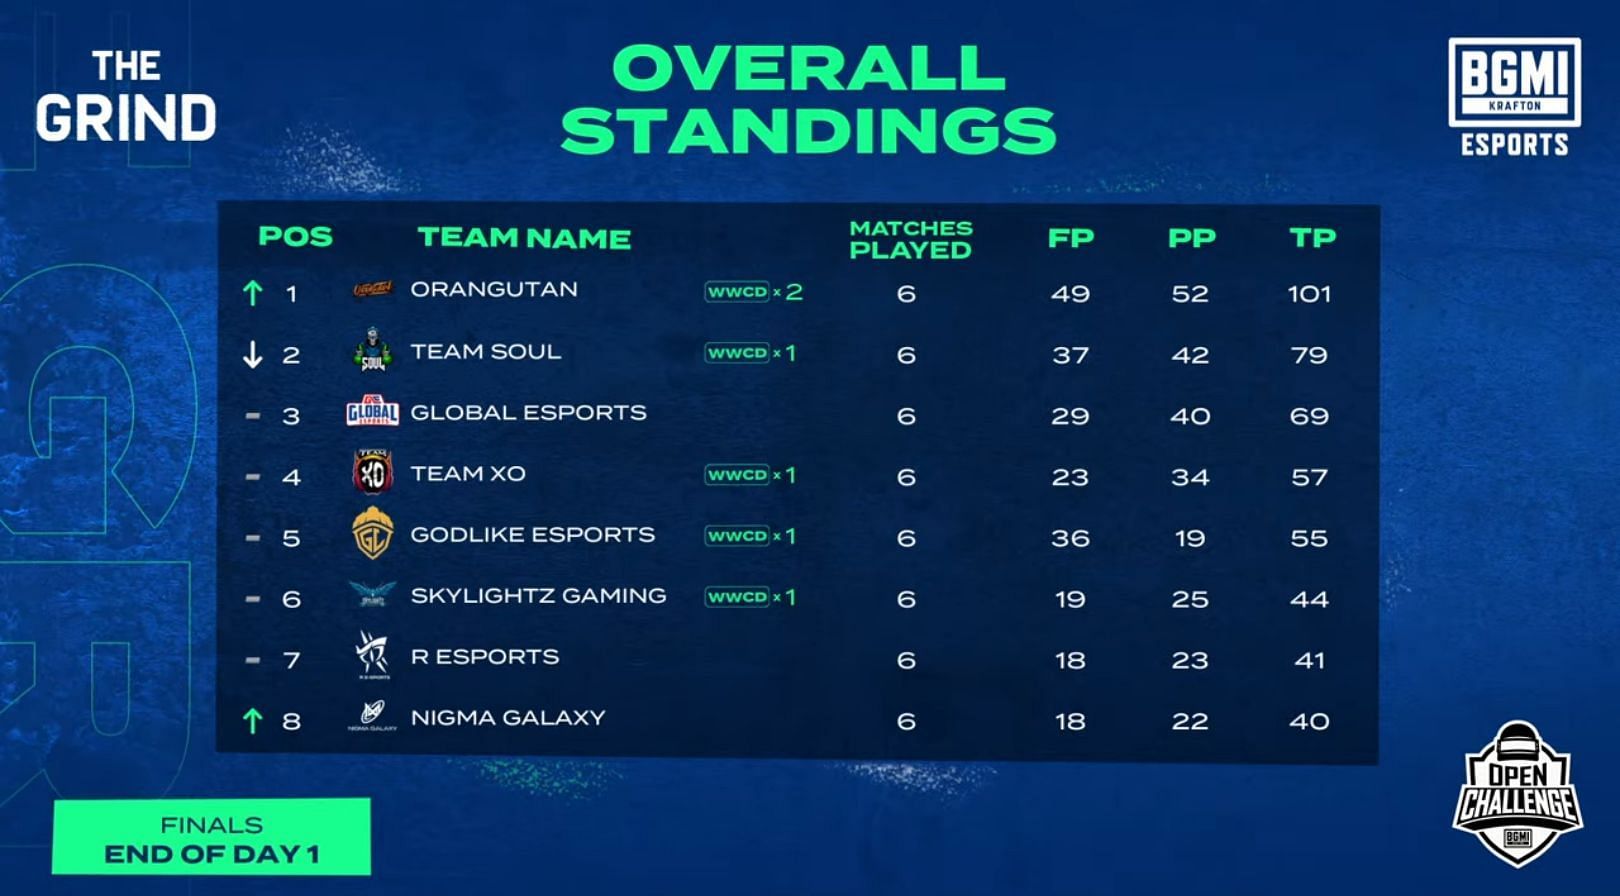 Orangutan placed at the top spot after BMOC The Grind Finals Day 1 (Image via BGMI)